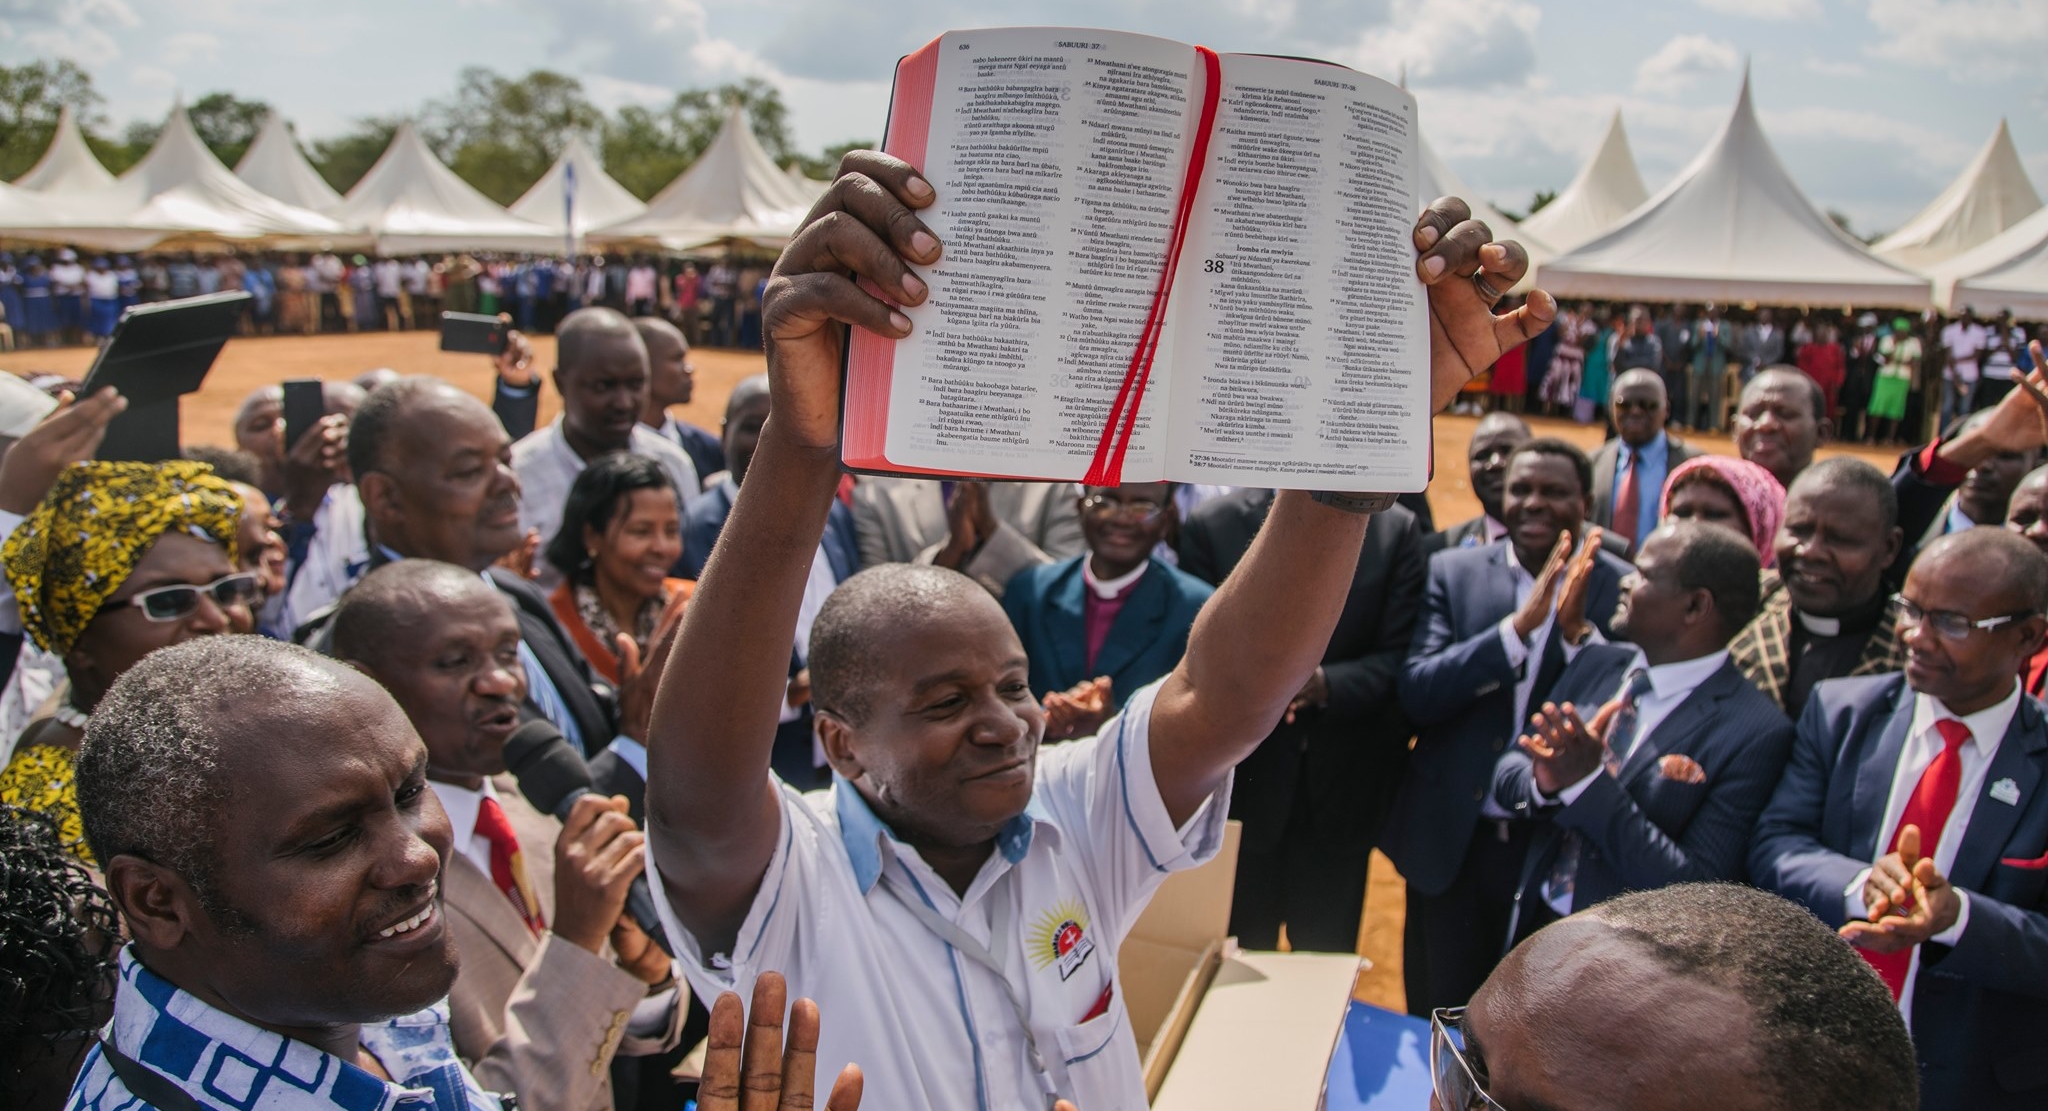 Bible Translation and Literacy (BTL) launched the Tharaka Bible for the Tharaka people